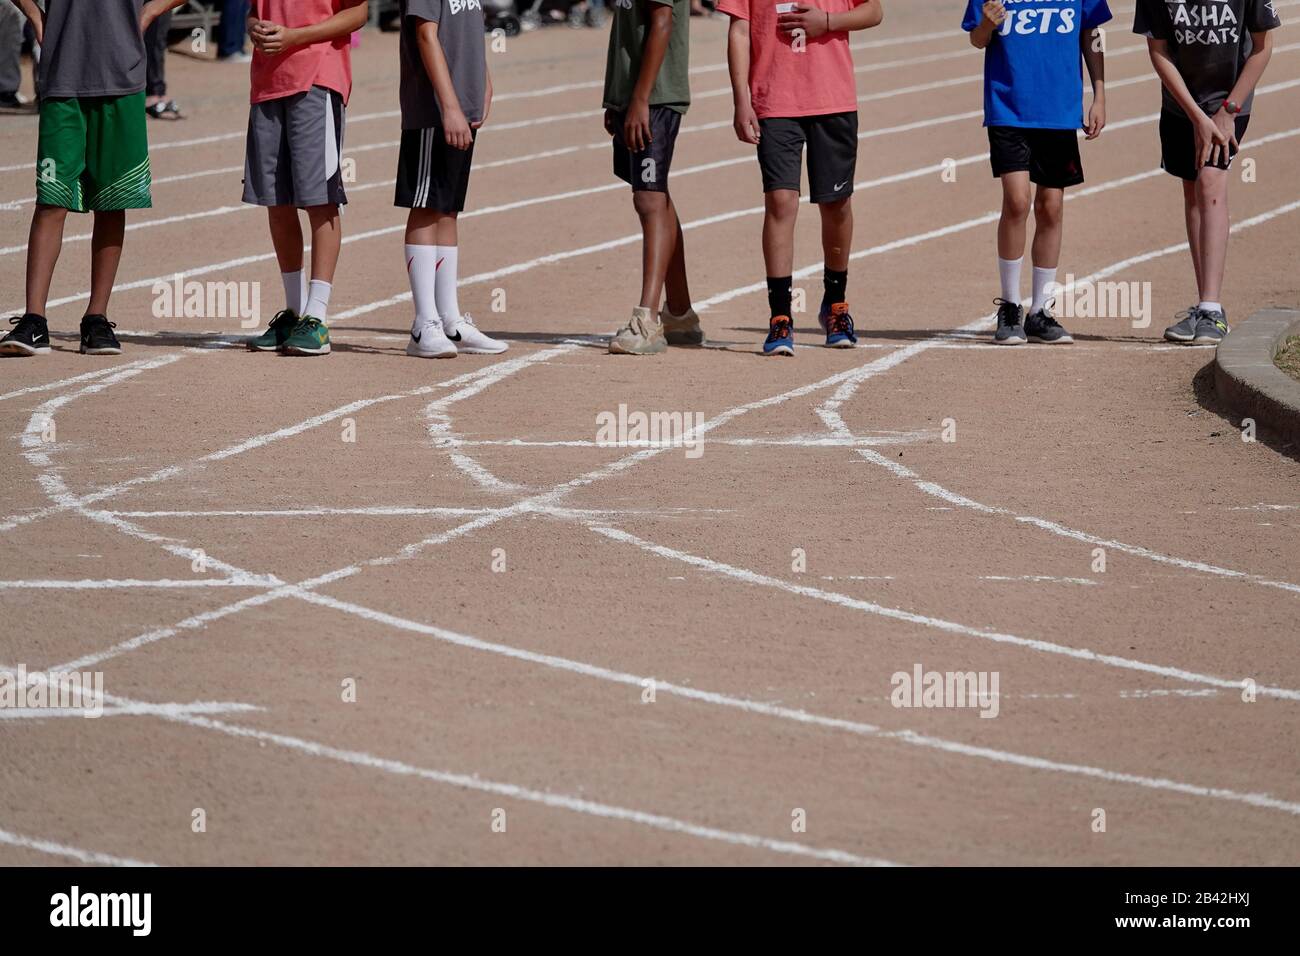 The bottom half of boys lined up for a race at a track meet. Stock Photo